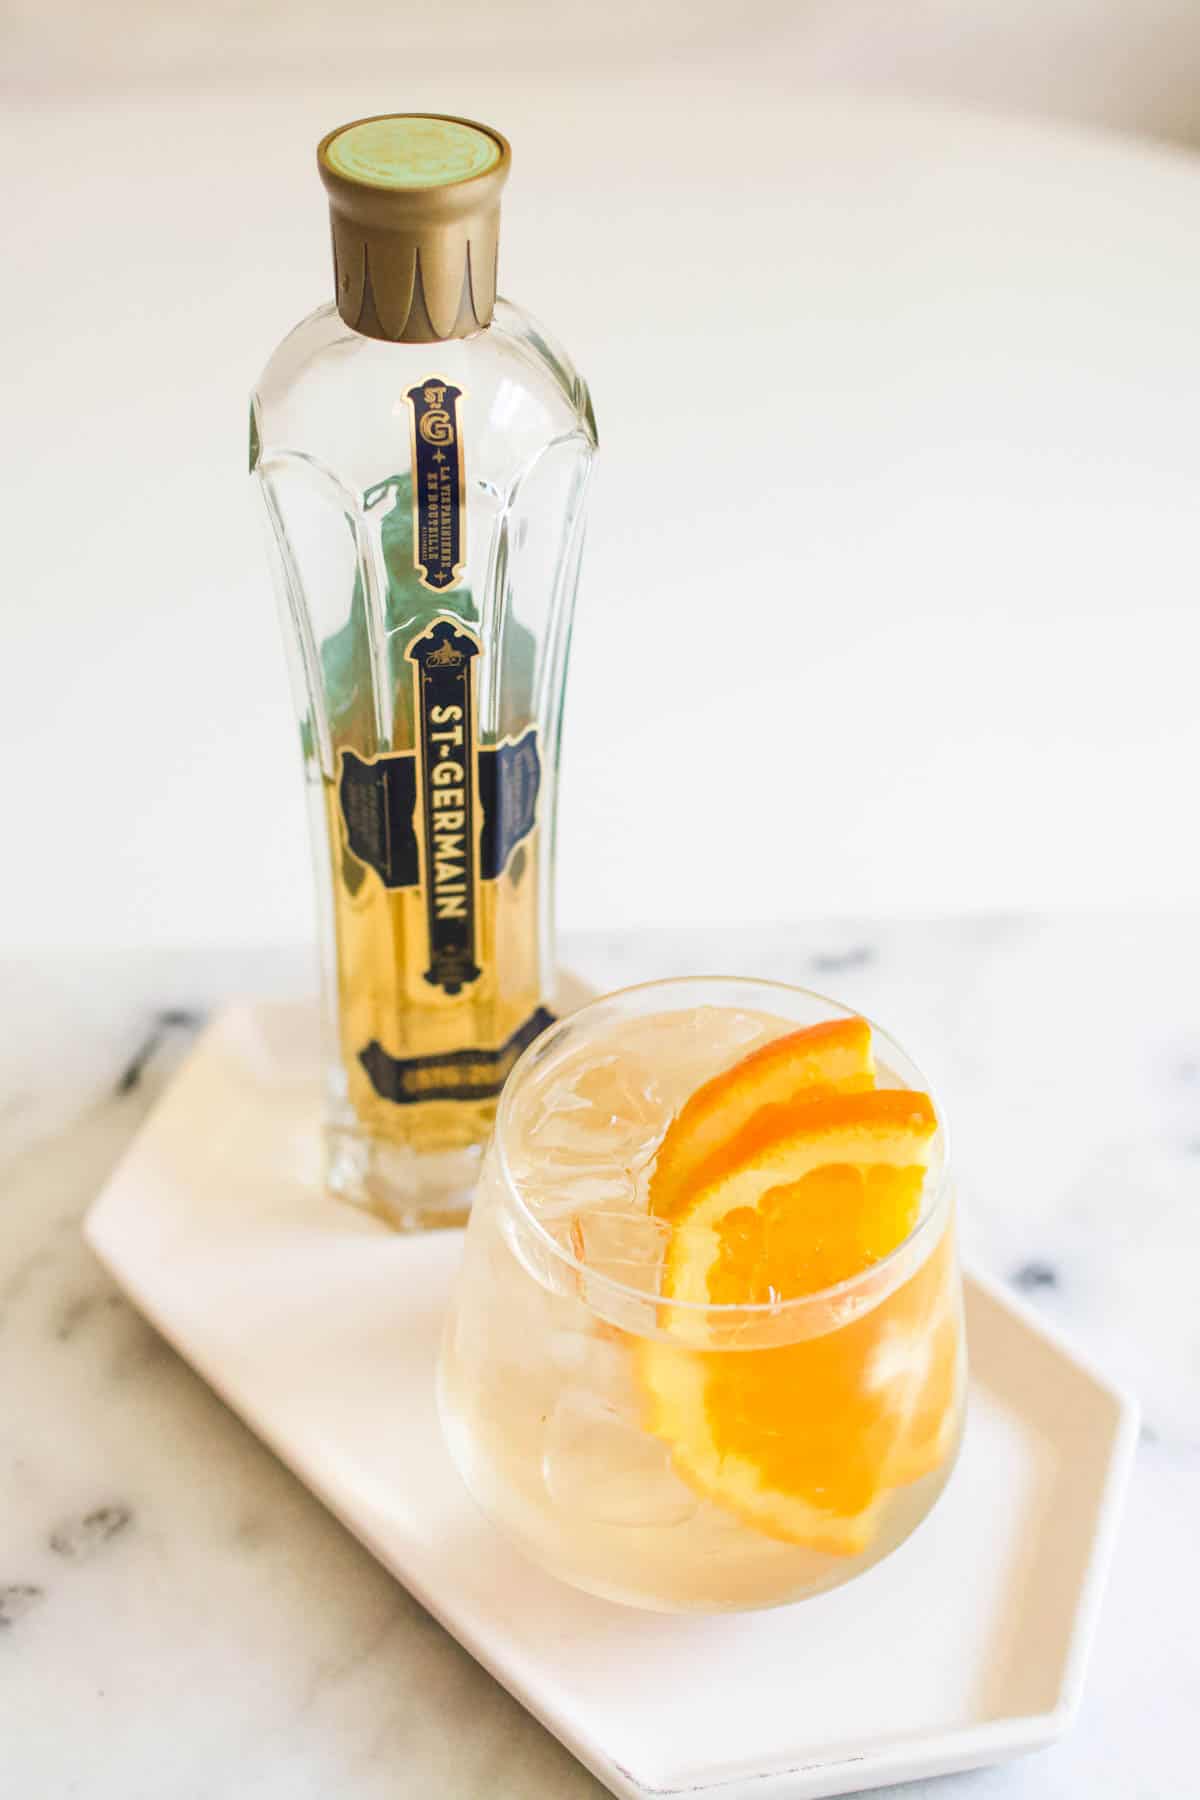 Bottle of St Germain next to a glass garnished with ice and orange slices.